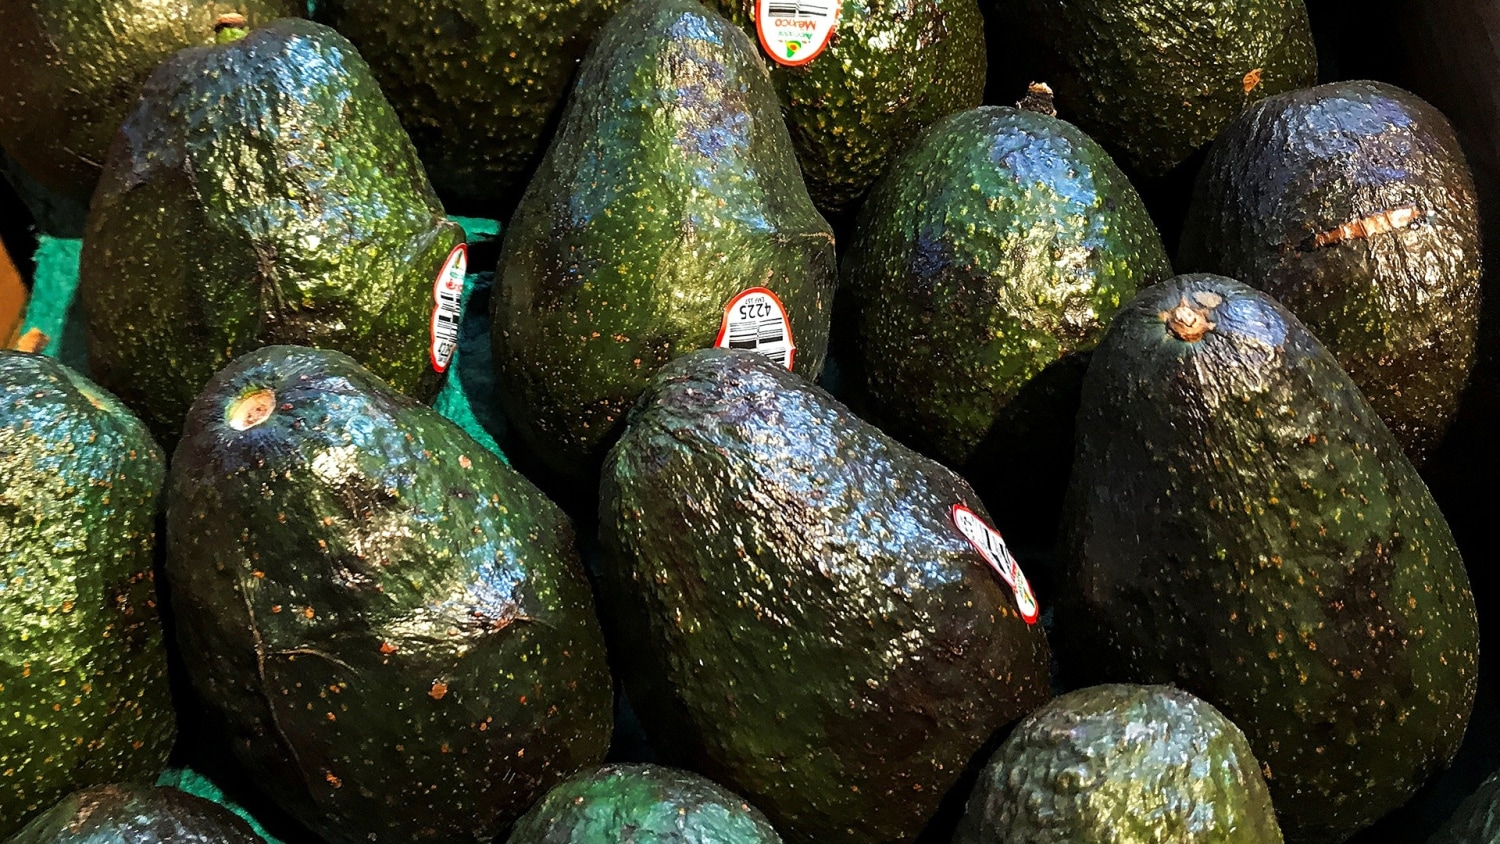 Storing Avocados in Water: FDA Cautions Against This Risky Trend